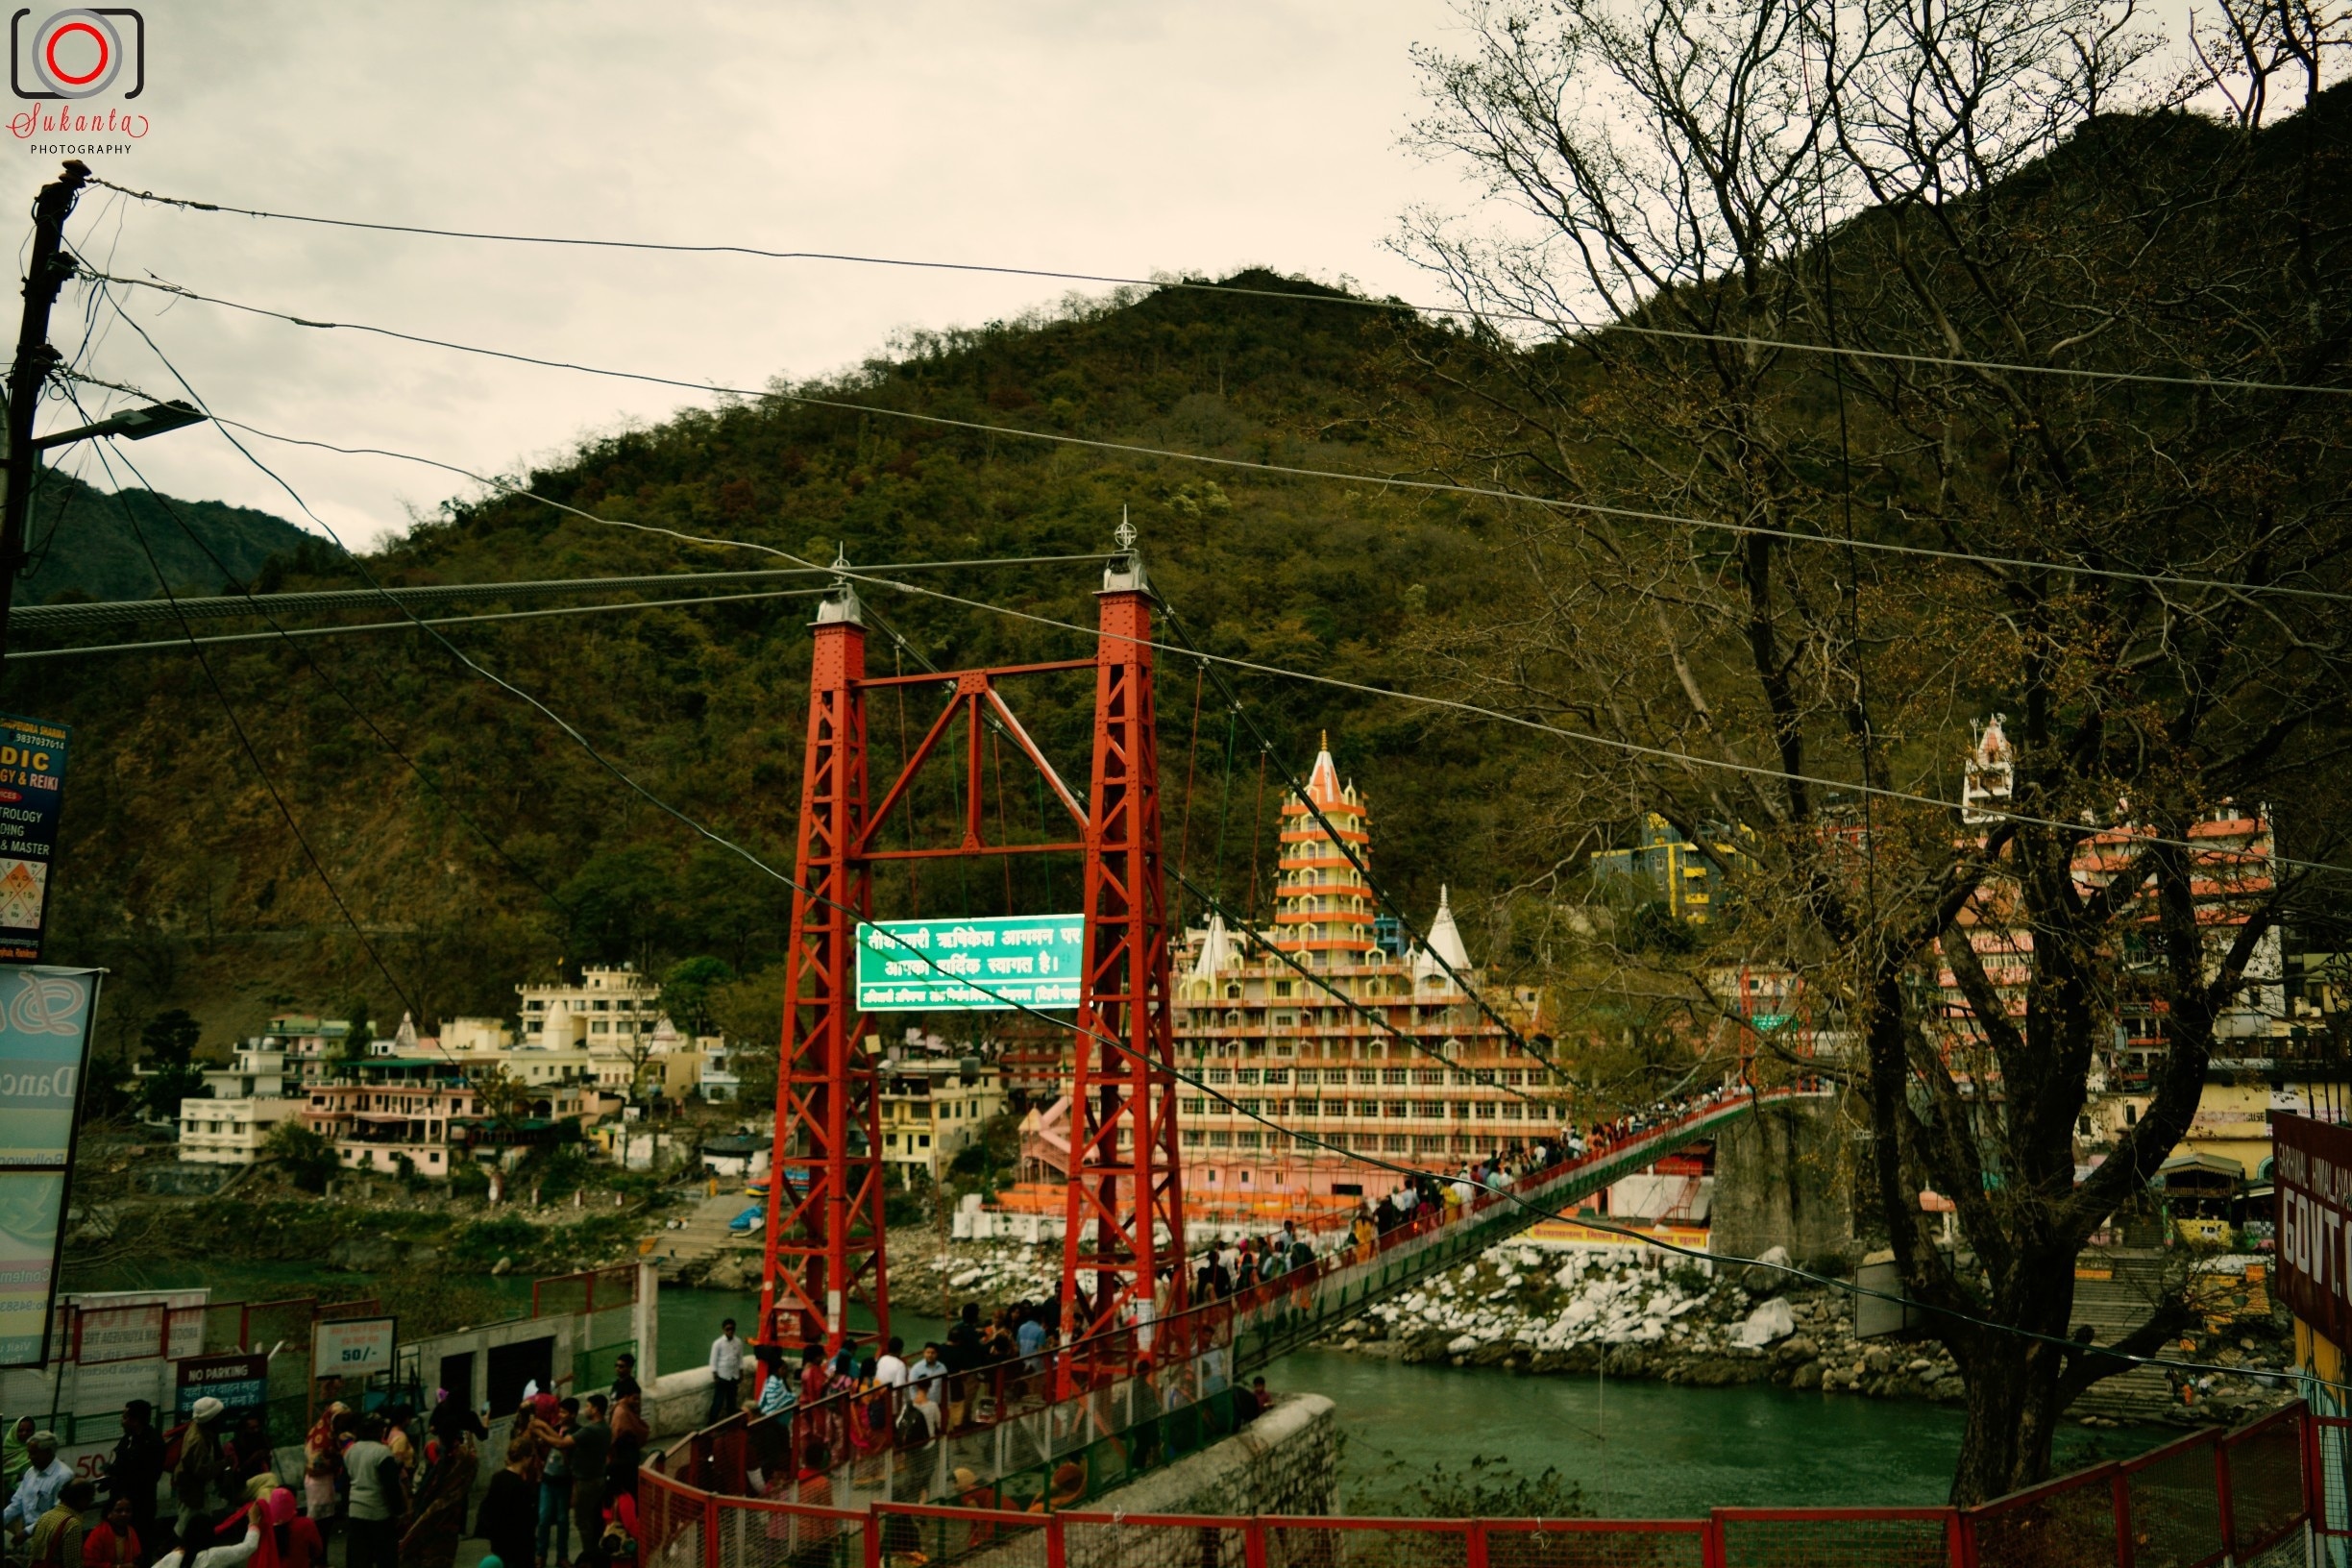 Laxman Jhula, built in 1939, Laxman or Lakshamana Jhula is a suspension bridge in Rishikesh With a length of 450 feet and at a height of around 70 feet from the river. According to Hindu mythology, this bridge is built in the same place, where Lakshamana once crossed the river Ganges on a jute rope, thus making this another important pilgrim attraction.